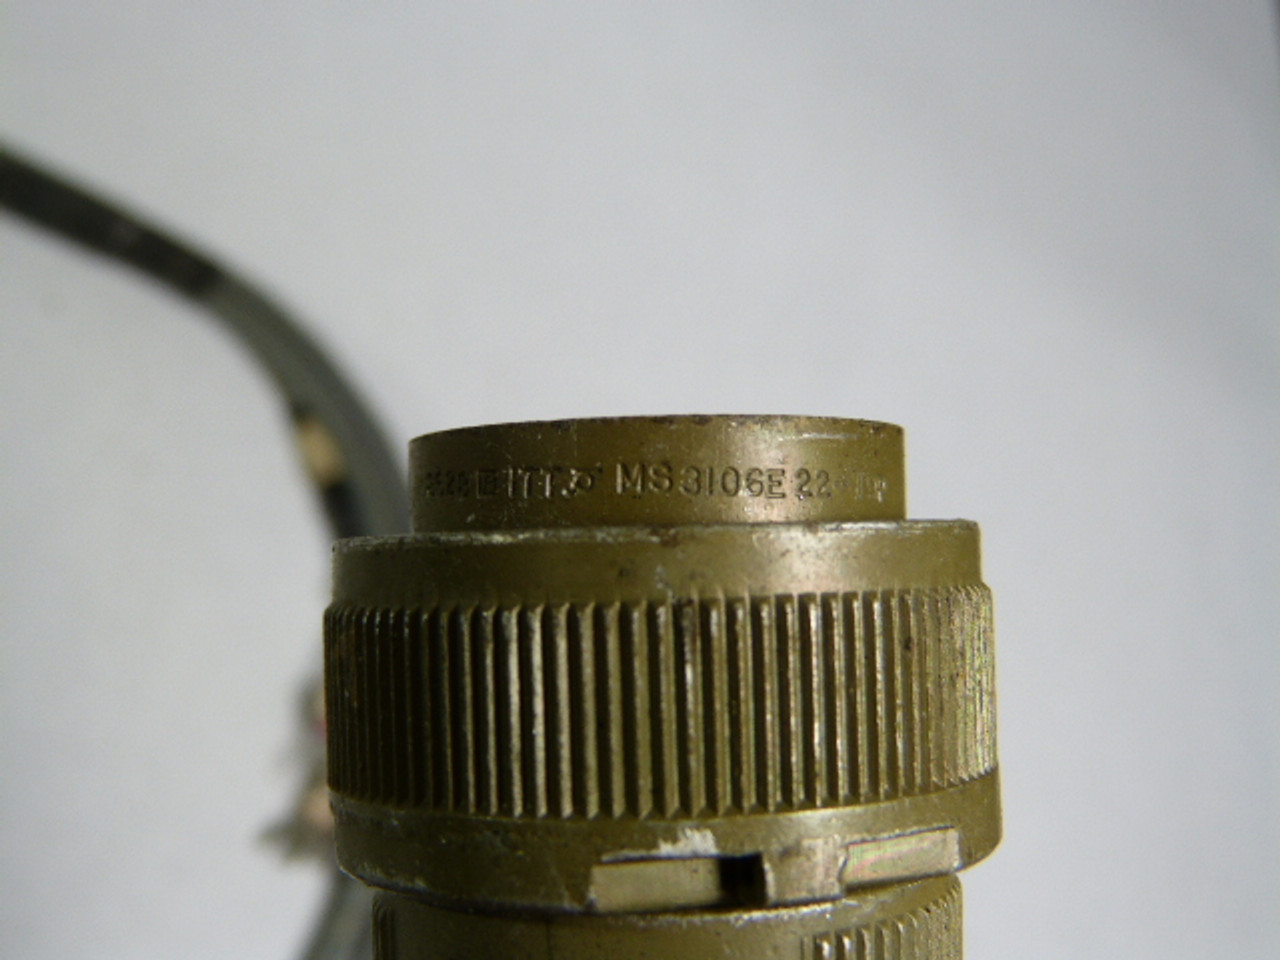 ITT Cannon MS3106E22-19P Circular Connector with Cable USED